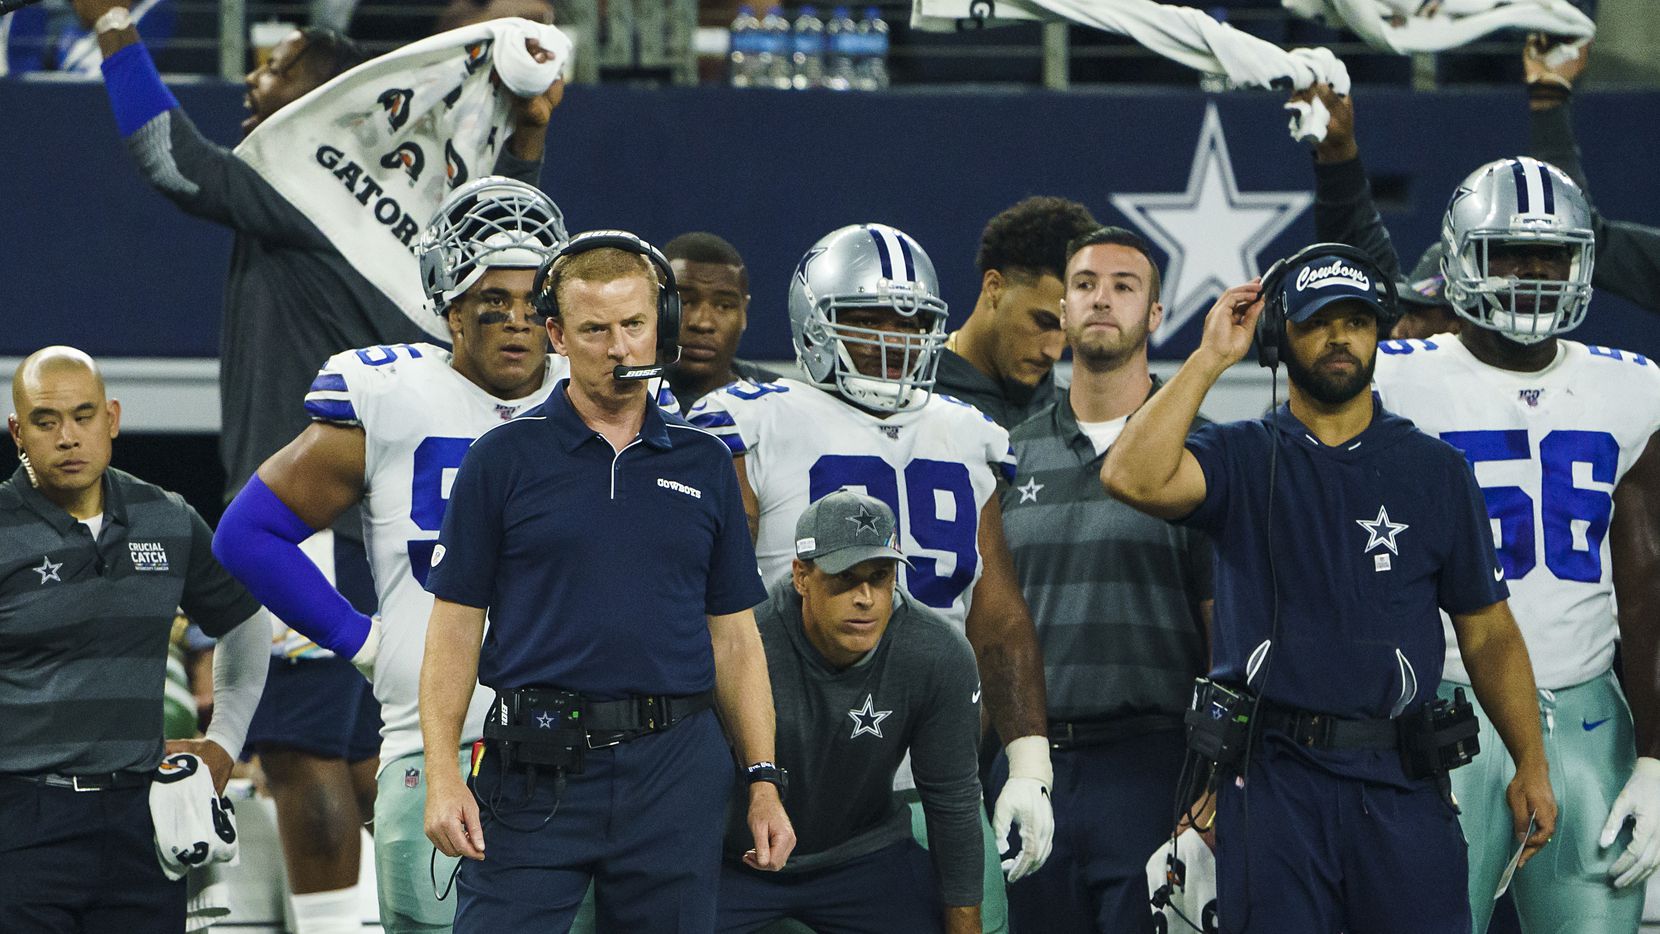 Dallas Cowboys head coach Jason Garrett watches as his team makes defensive stand during the second half of an NFL football game against the Philadelphia Eagles at AT&T Stadium on Sunday, Oct. 20, 2019, in Arlington.